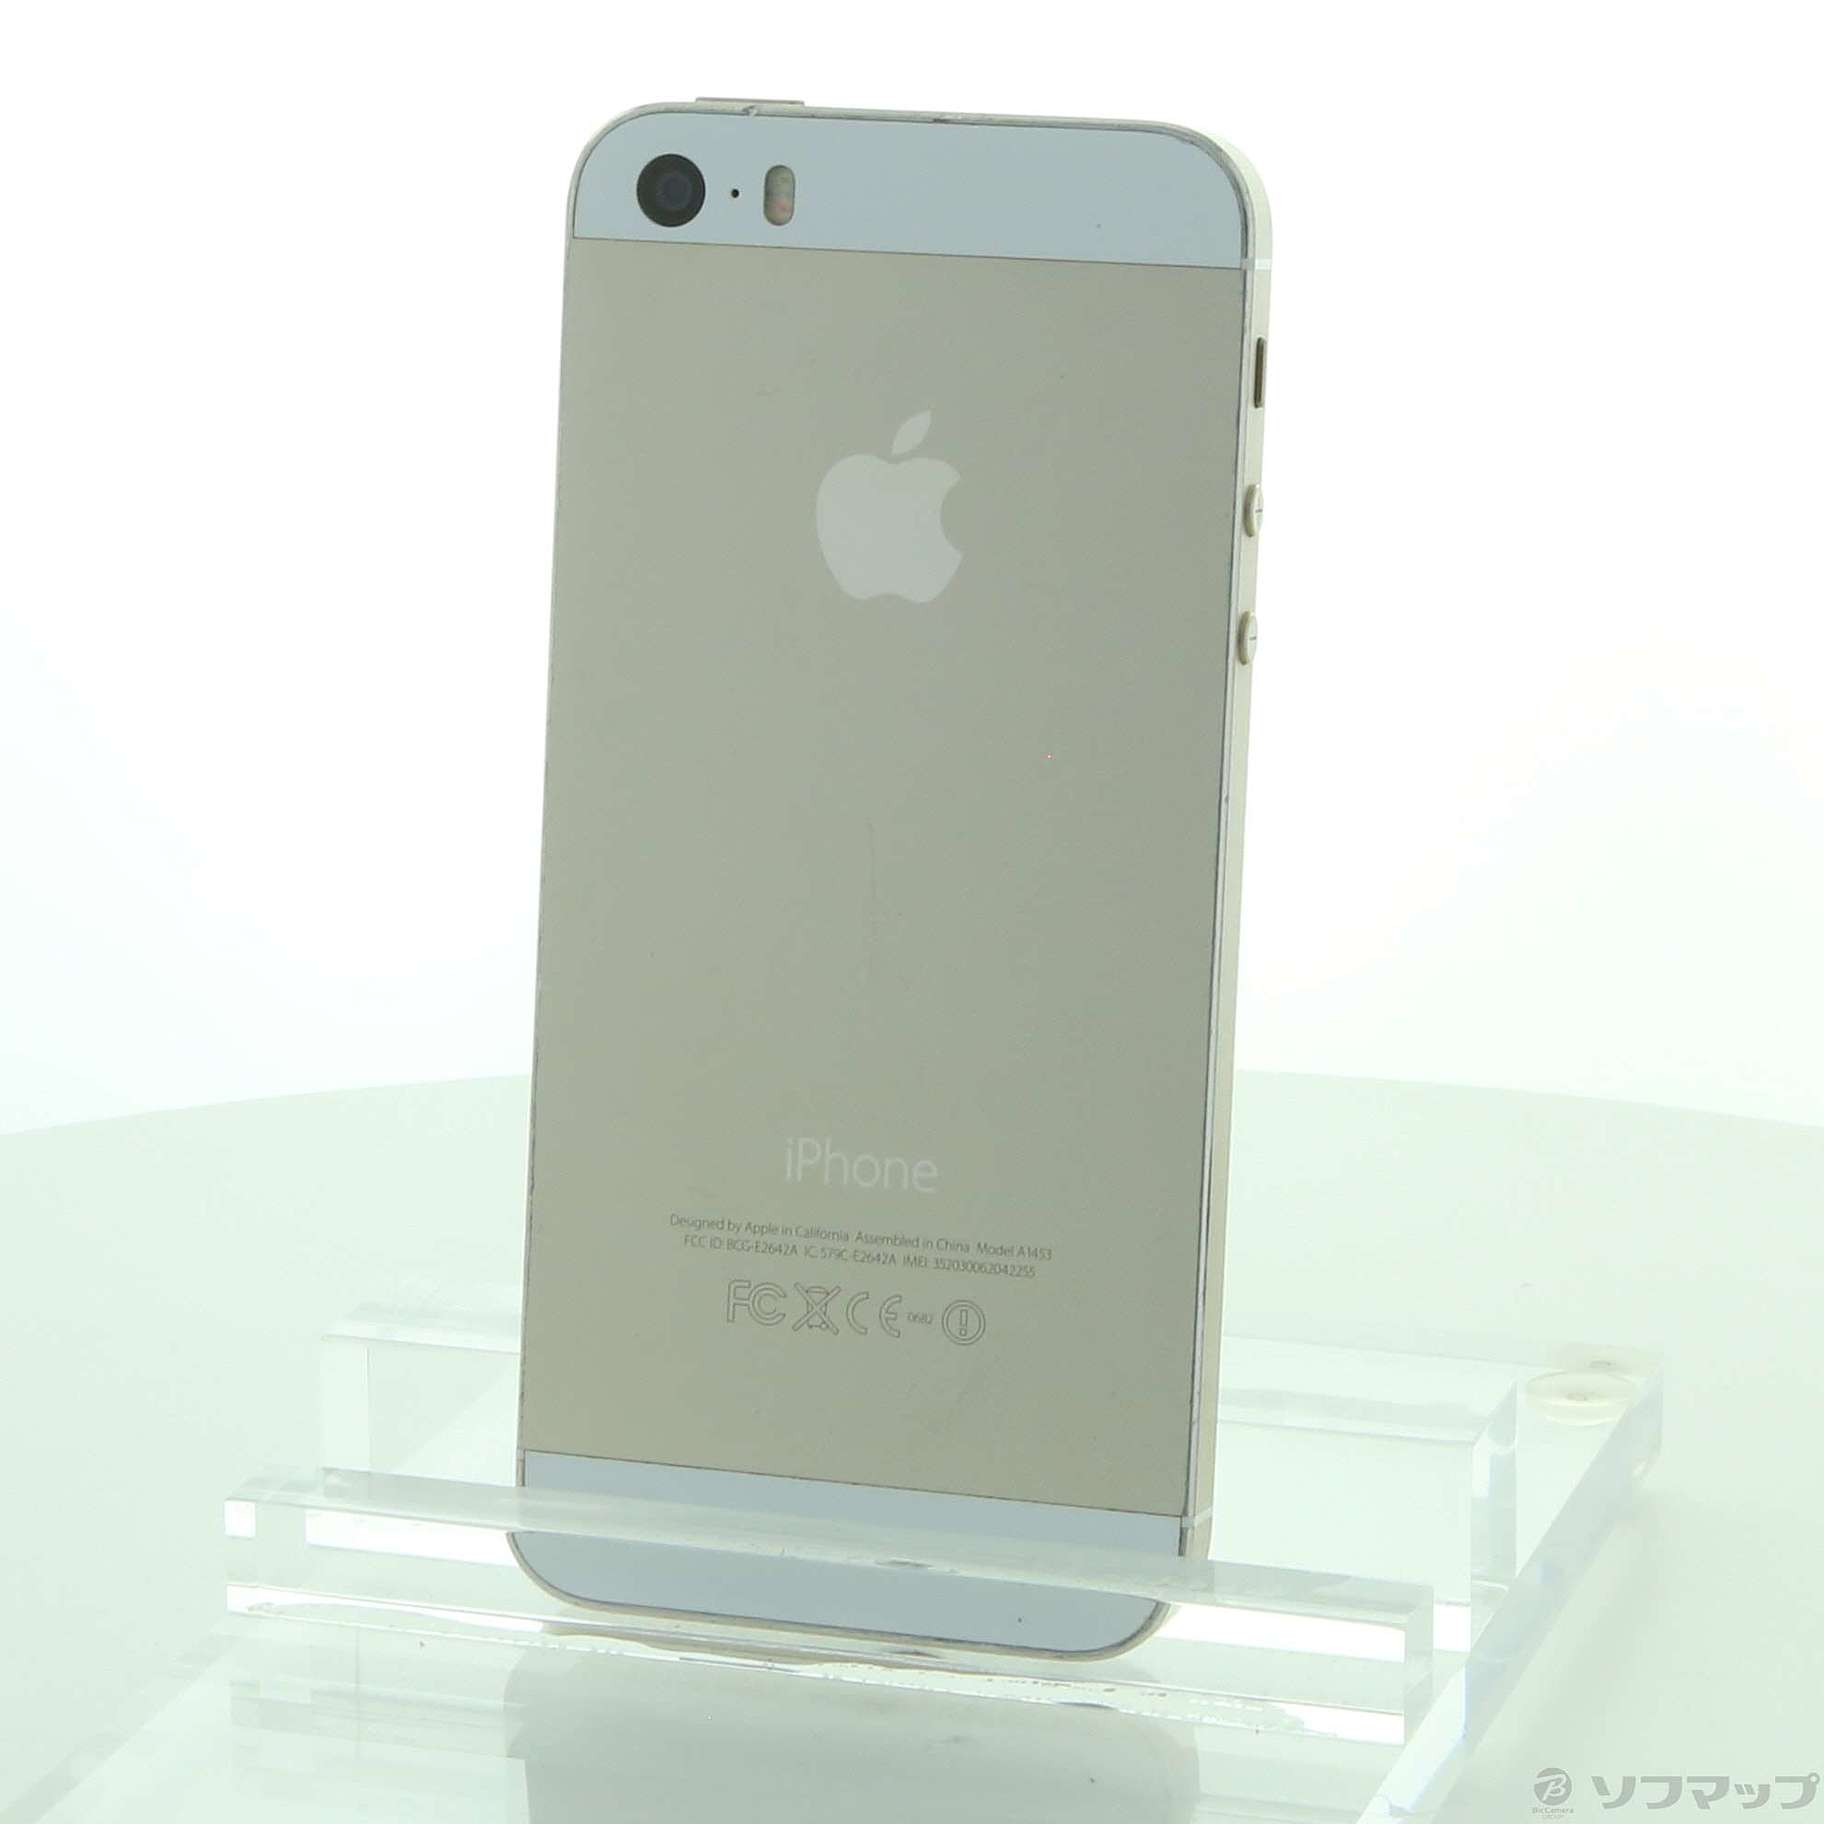 iPhone5s　６４GB　ソフトバンク